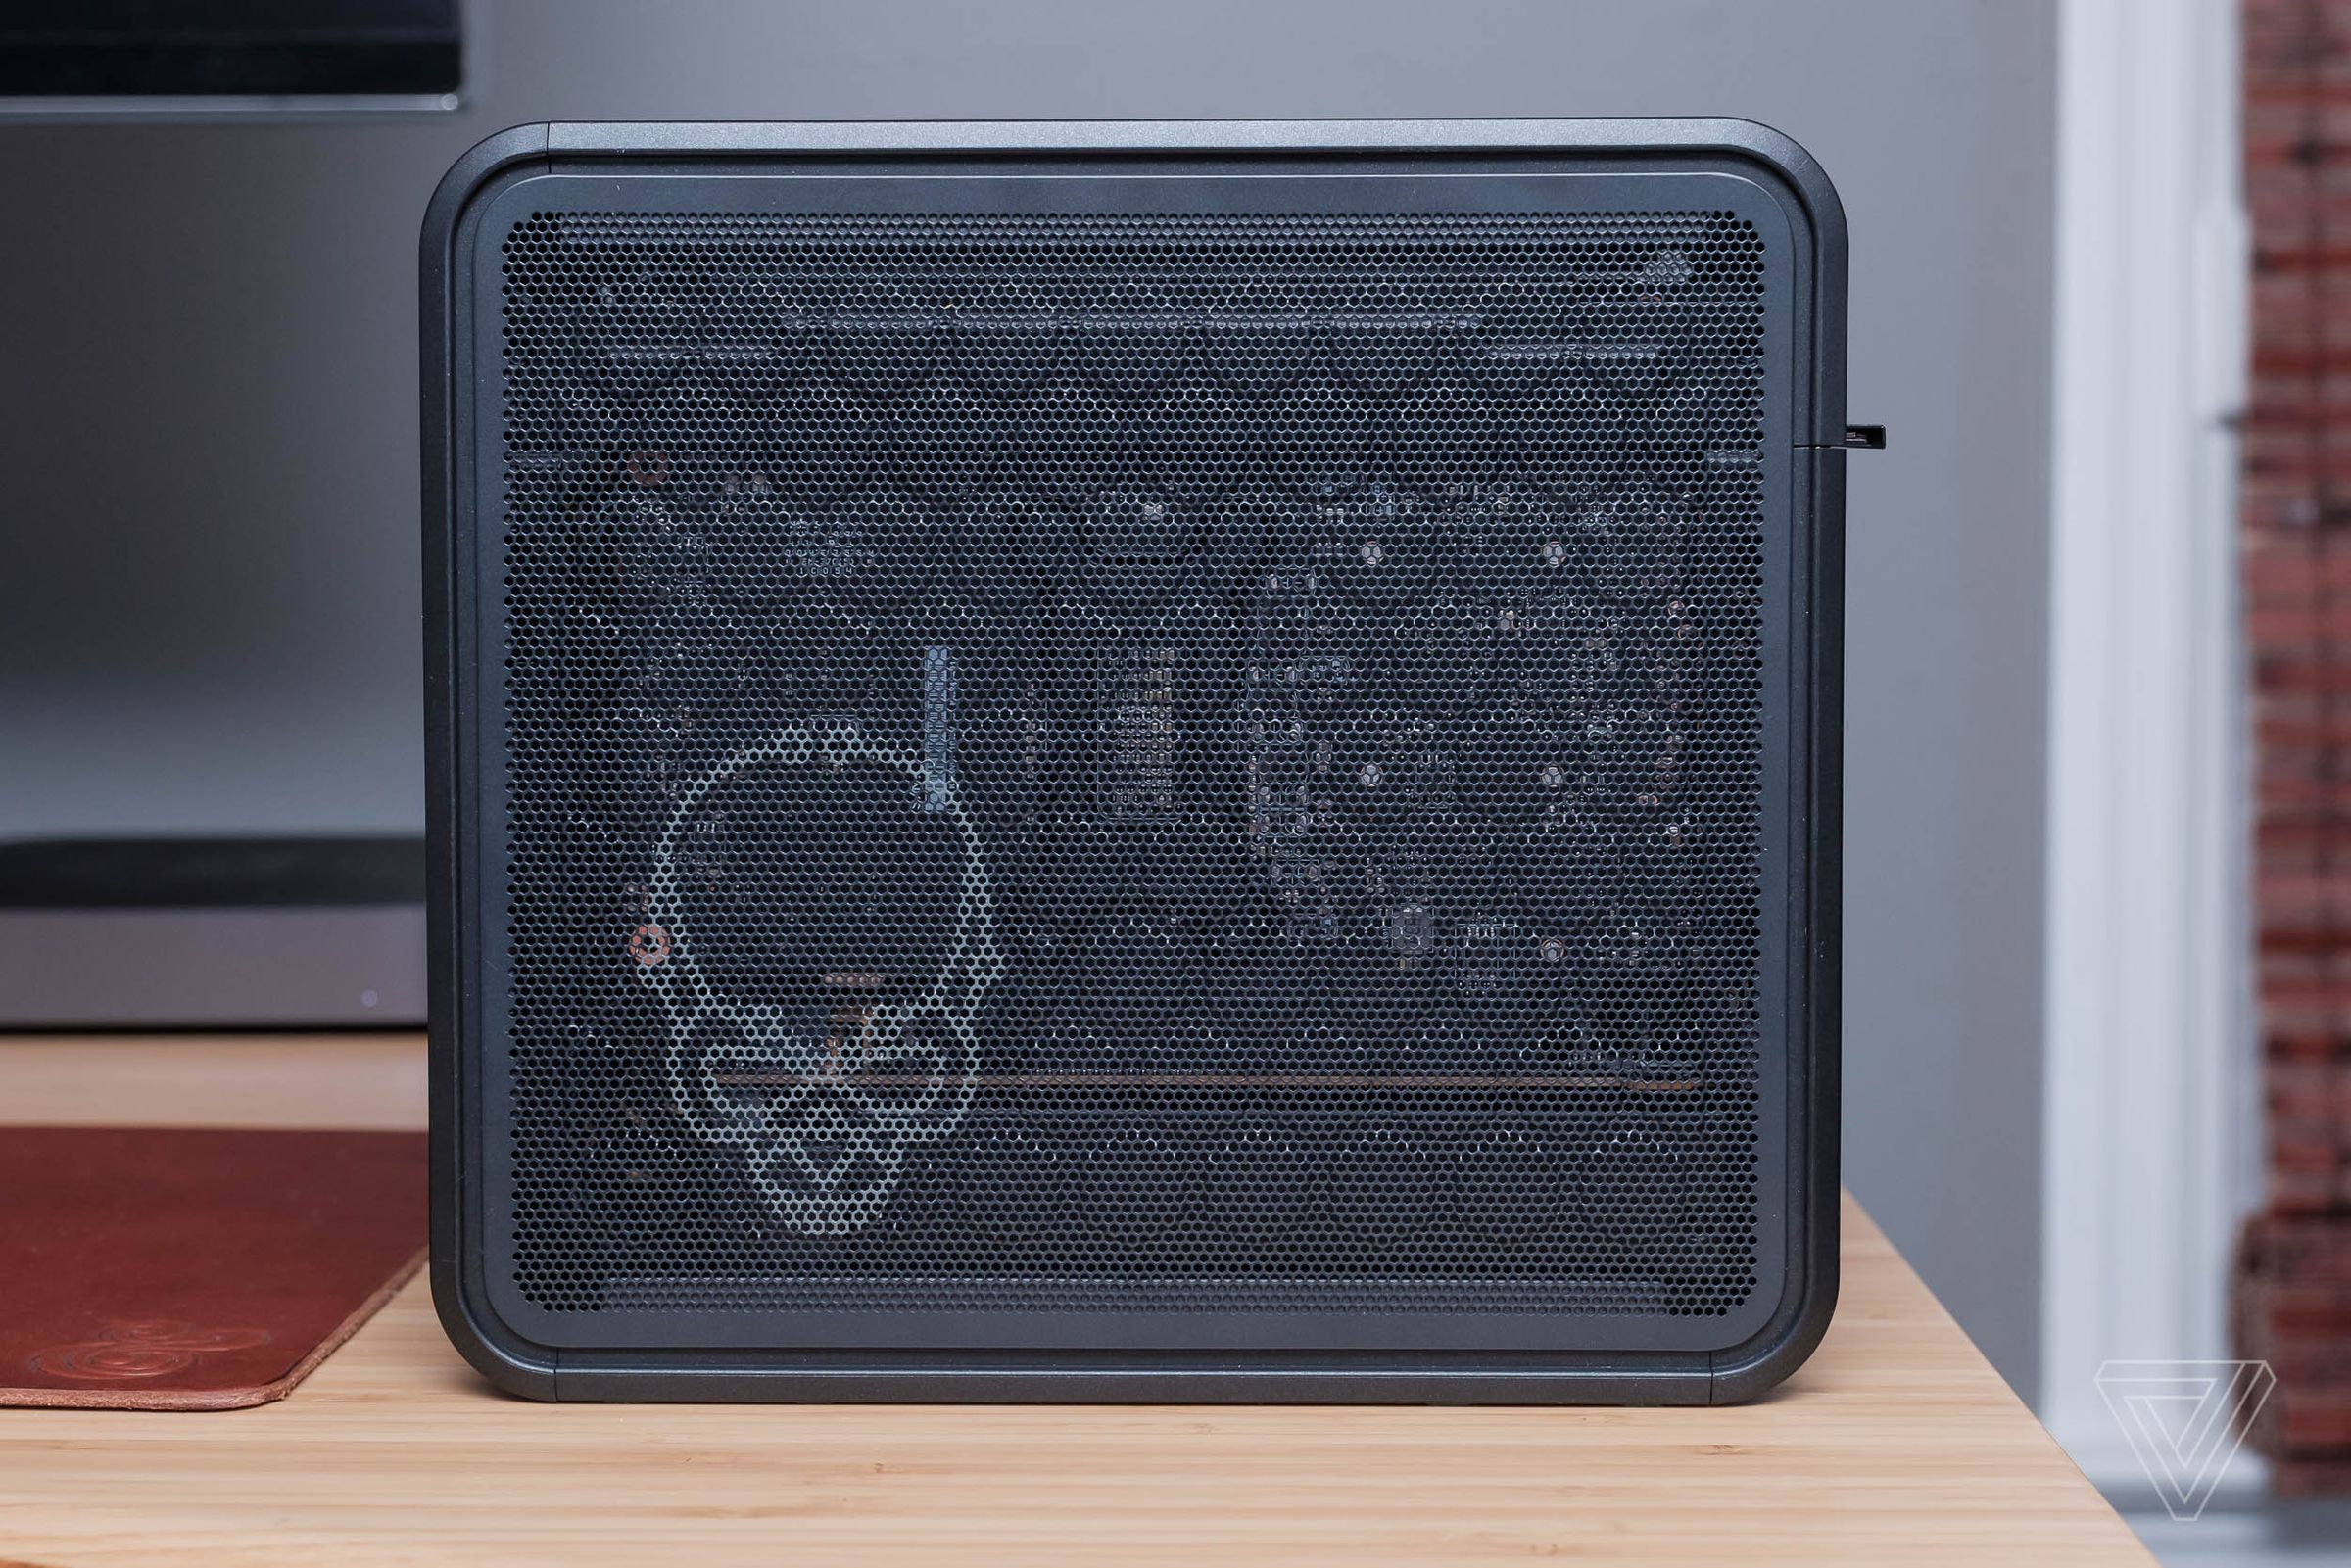 The mesh sides help keep the NUC 9’s powerful components cool. They also have a skull printed on them.